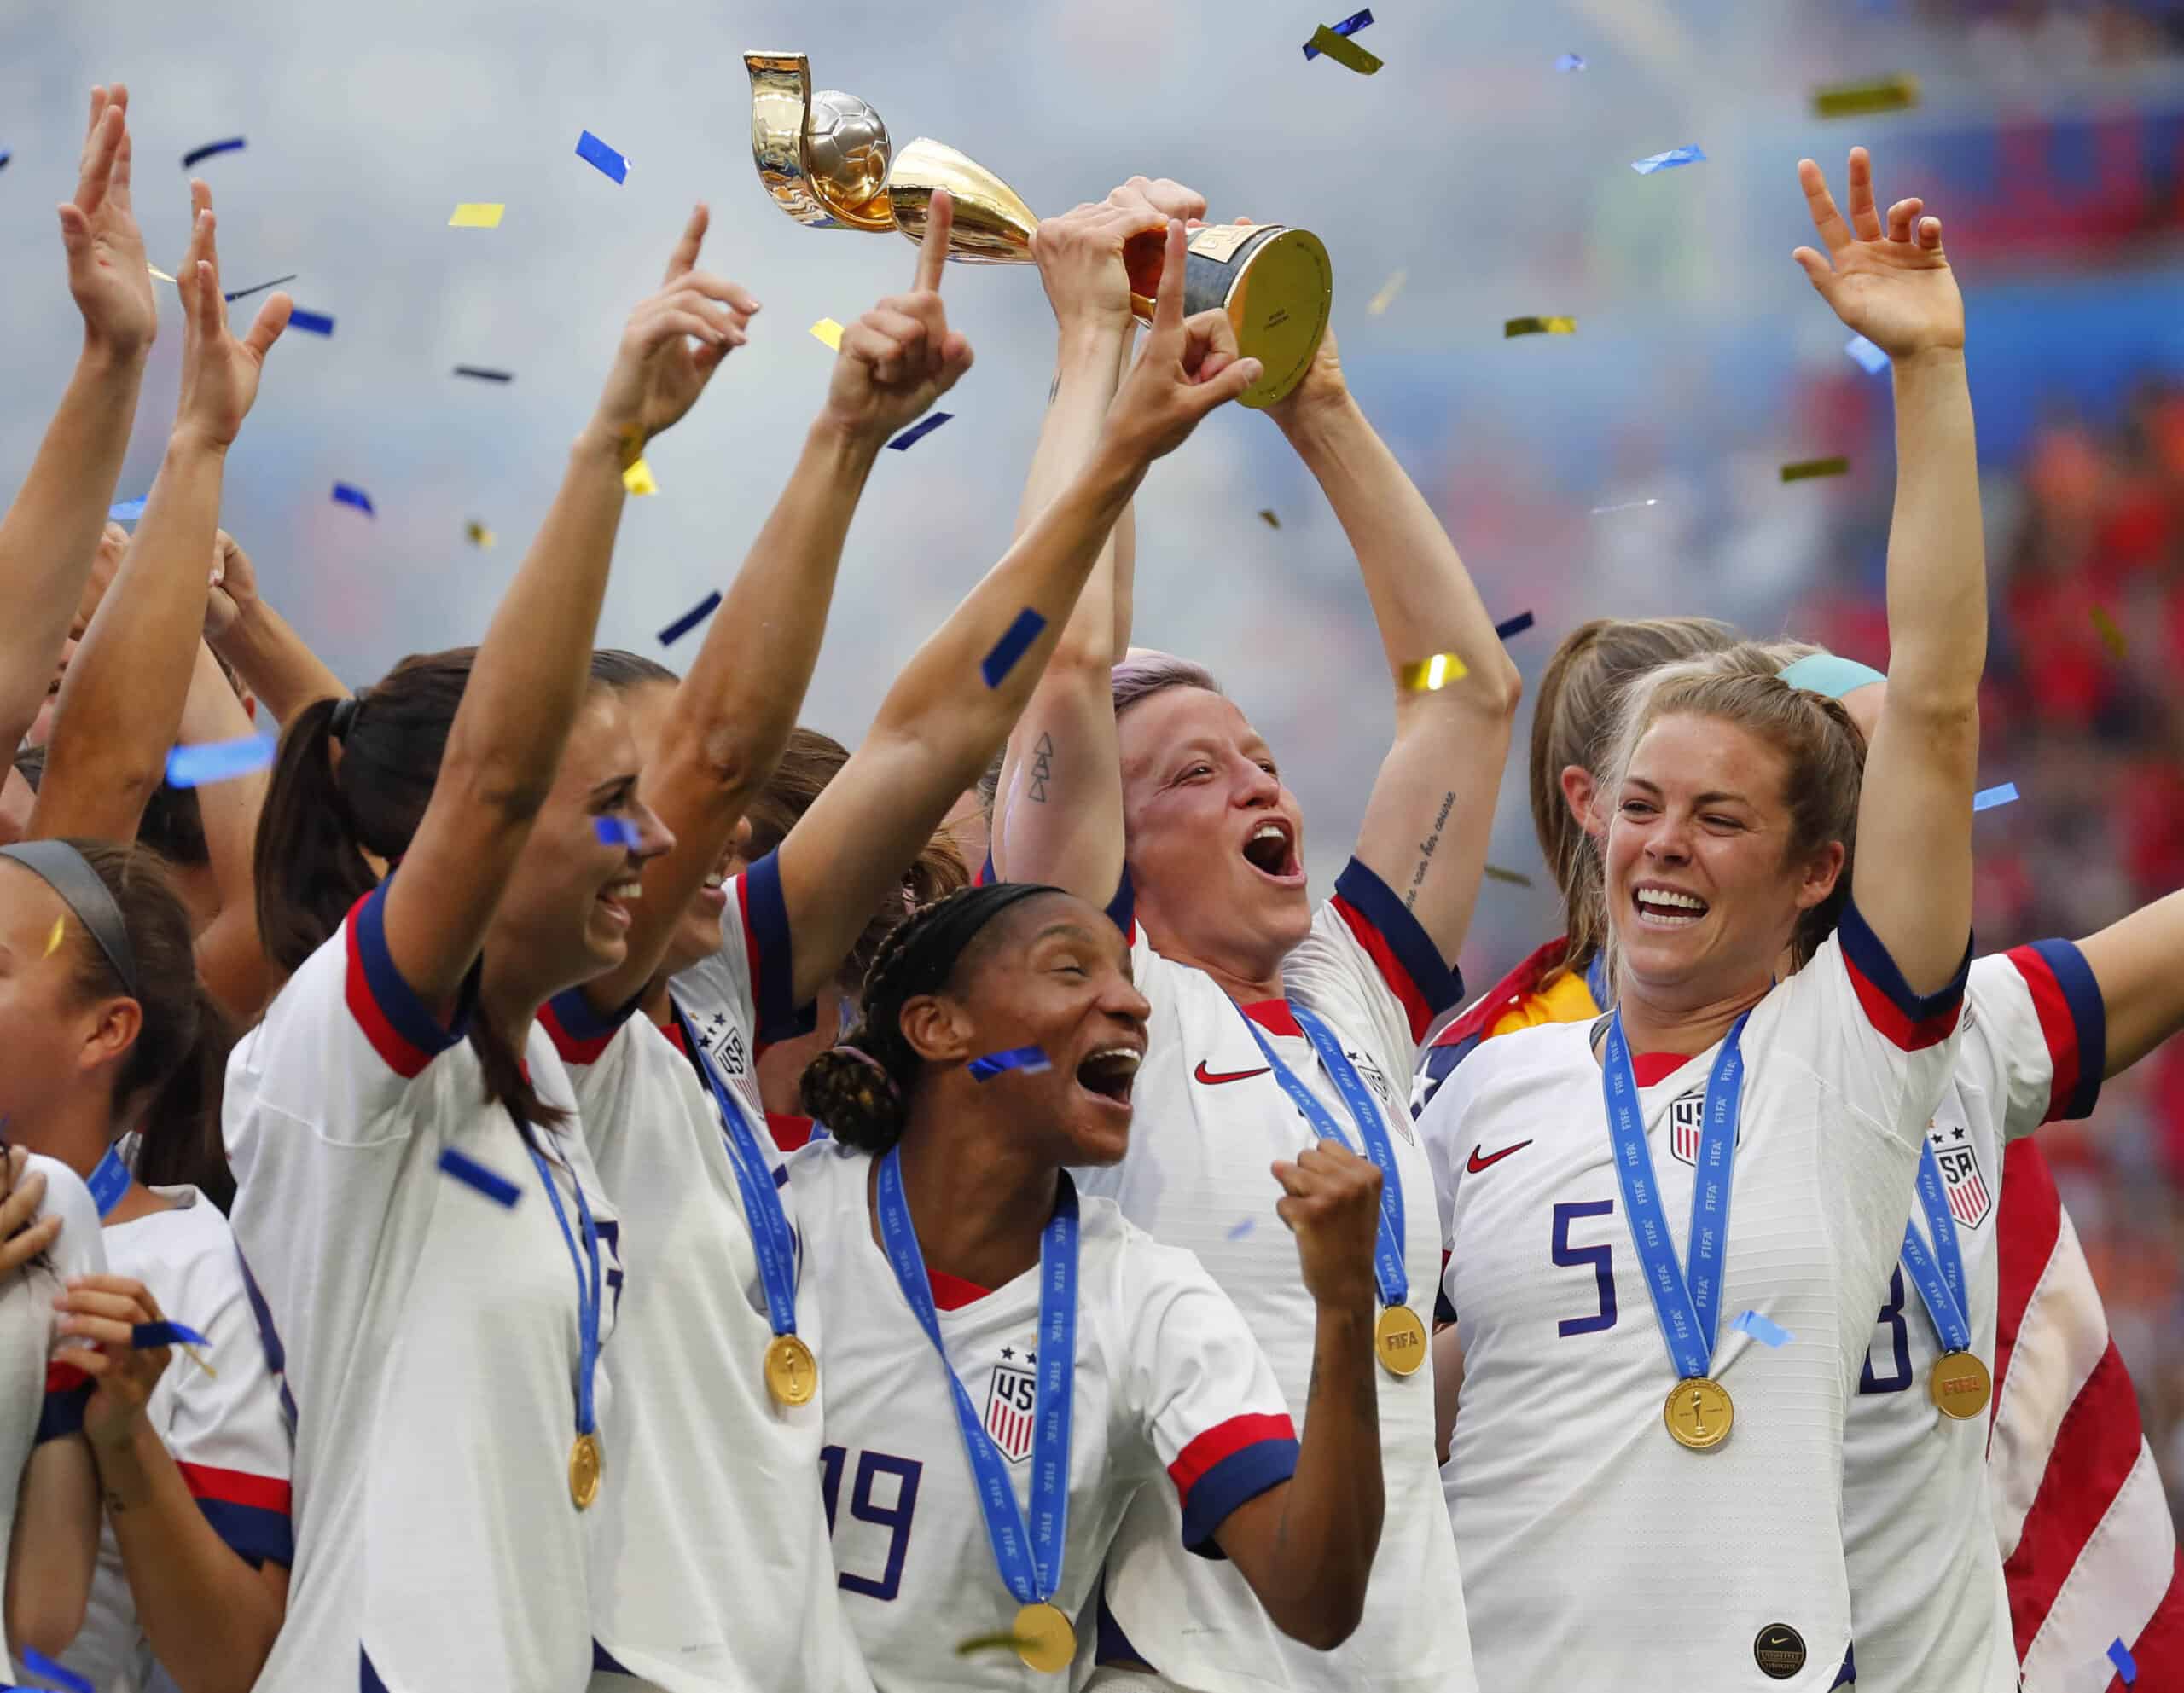 U.S. national team to get paid more at this year's world cup.